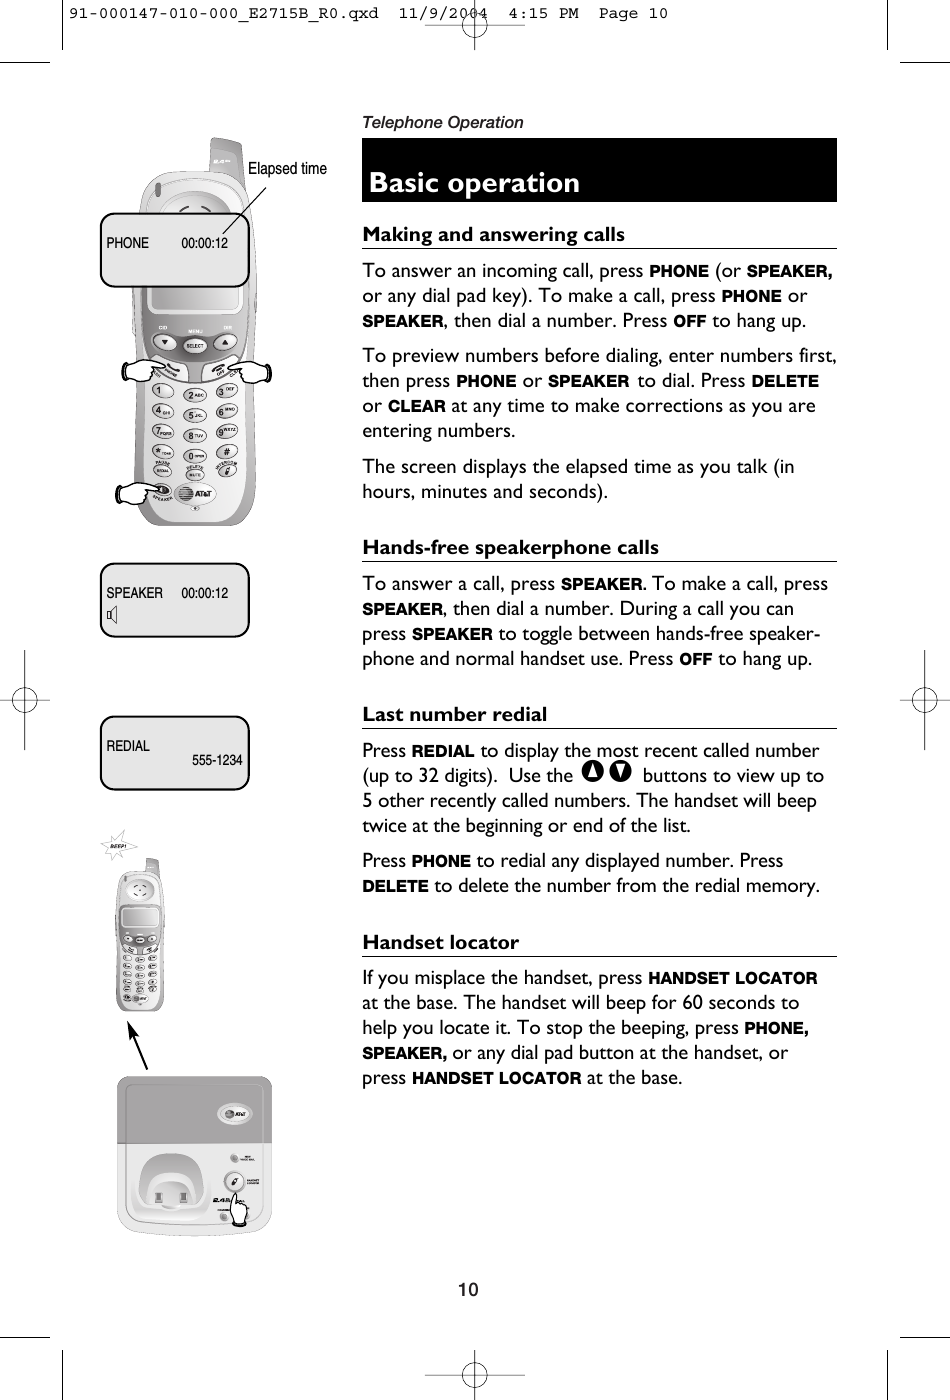 10Telephone OperationBasic operationMaking and answering callsTo answer an incoming call, press PHONE (or SPEAKER,or any dial pad key). To make a call, press PHONE orSPEAKER, then dial a number. Press OFF to hang up.To preview numbers before dialing, enter numbers first,then press PHONE or SPEAKER to dial. Press DELETEor CLEAR at any time to make corrections as you areentering numbers. The screen displays the elapsed time as you talk (inhours, minutes and seconds).Hands-free speakerphone callsTo answer a call, press SPEAKER. To make a call, pressSPEAKER, then dial a number. During a call you canpress SPEAKER to toggle between hands-free speaker-phone and normal handset use. Press OFF to hang up.Last number redialPress REDIAL to display the most recent called number(up to 32 digits).  Use the ^V buttons to view up to5 other recently called numbers. The handset will beeptwice at the beginning or end of the list.Press PHONE to redial any displayed number. PressDELETE to delete the number from the redial memory.Handset locatorIf you misplace the handset, press HANDSET LOCATORat the base. The handset will beep for 60 seconds tohelp you locate it. To stop the beeping, press PHONE,SPEAKER, or any dial pad button at the handset, orpress HANDSET LOCATOR at the base.Elapsed timePHONE 00:00:12SPEAKER 00:00:12REDIAL555-123491-000147-010-000_E2715B_R0.qxd  11/9/2004  4:15 PM  Page 10